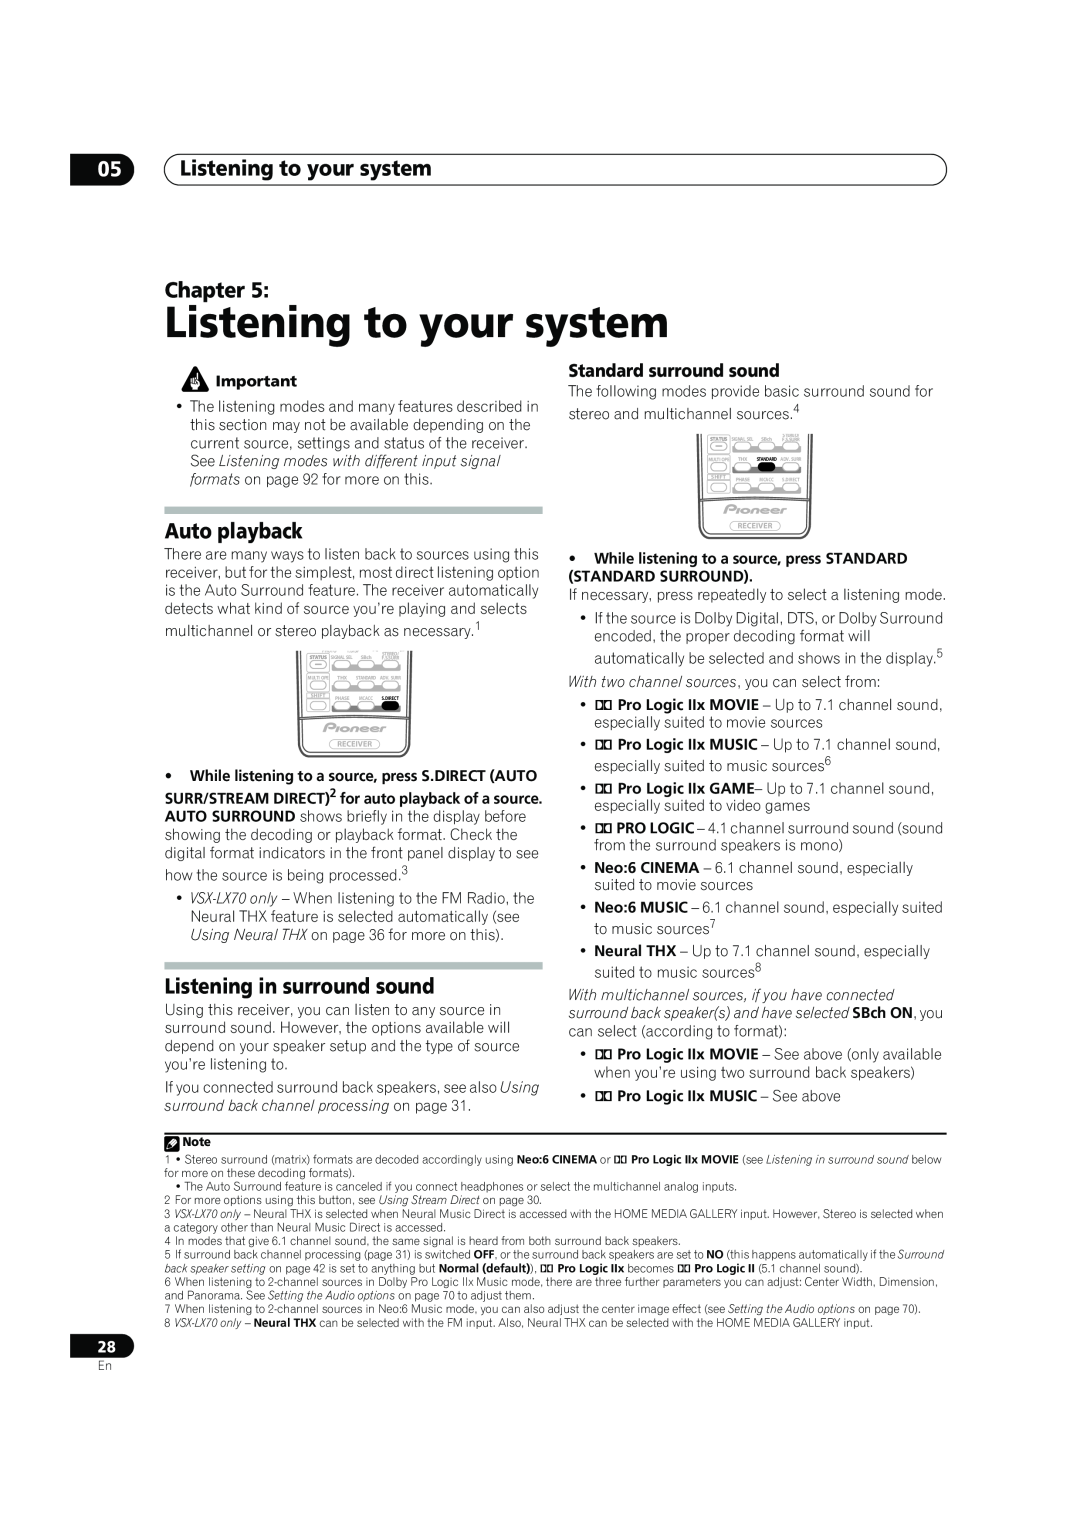 Pioneer VSX-LX60 operating instructions 05Listening to your system Chapter, Auto playback, Listening in surround sound 